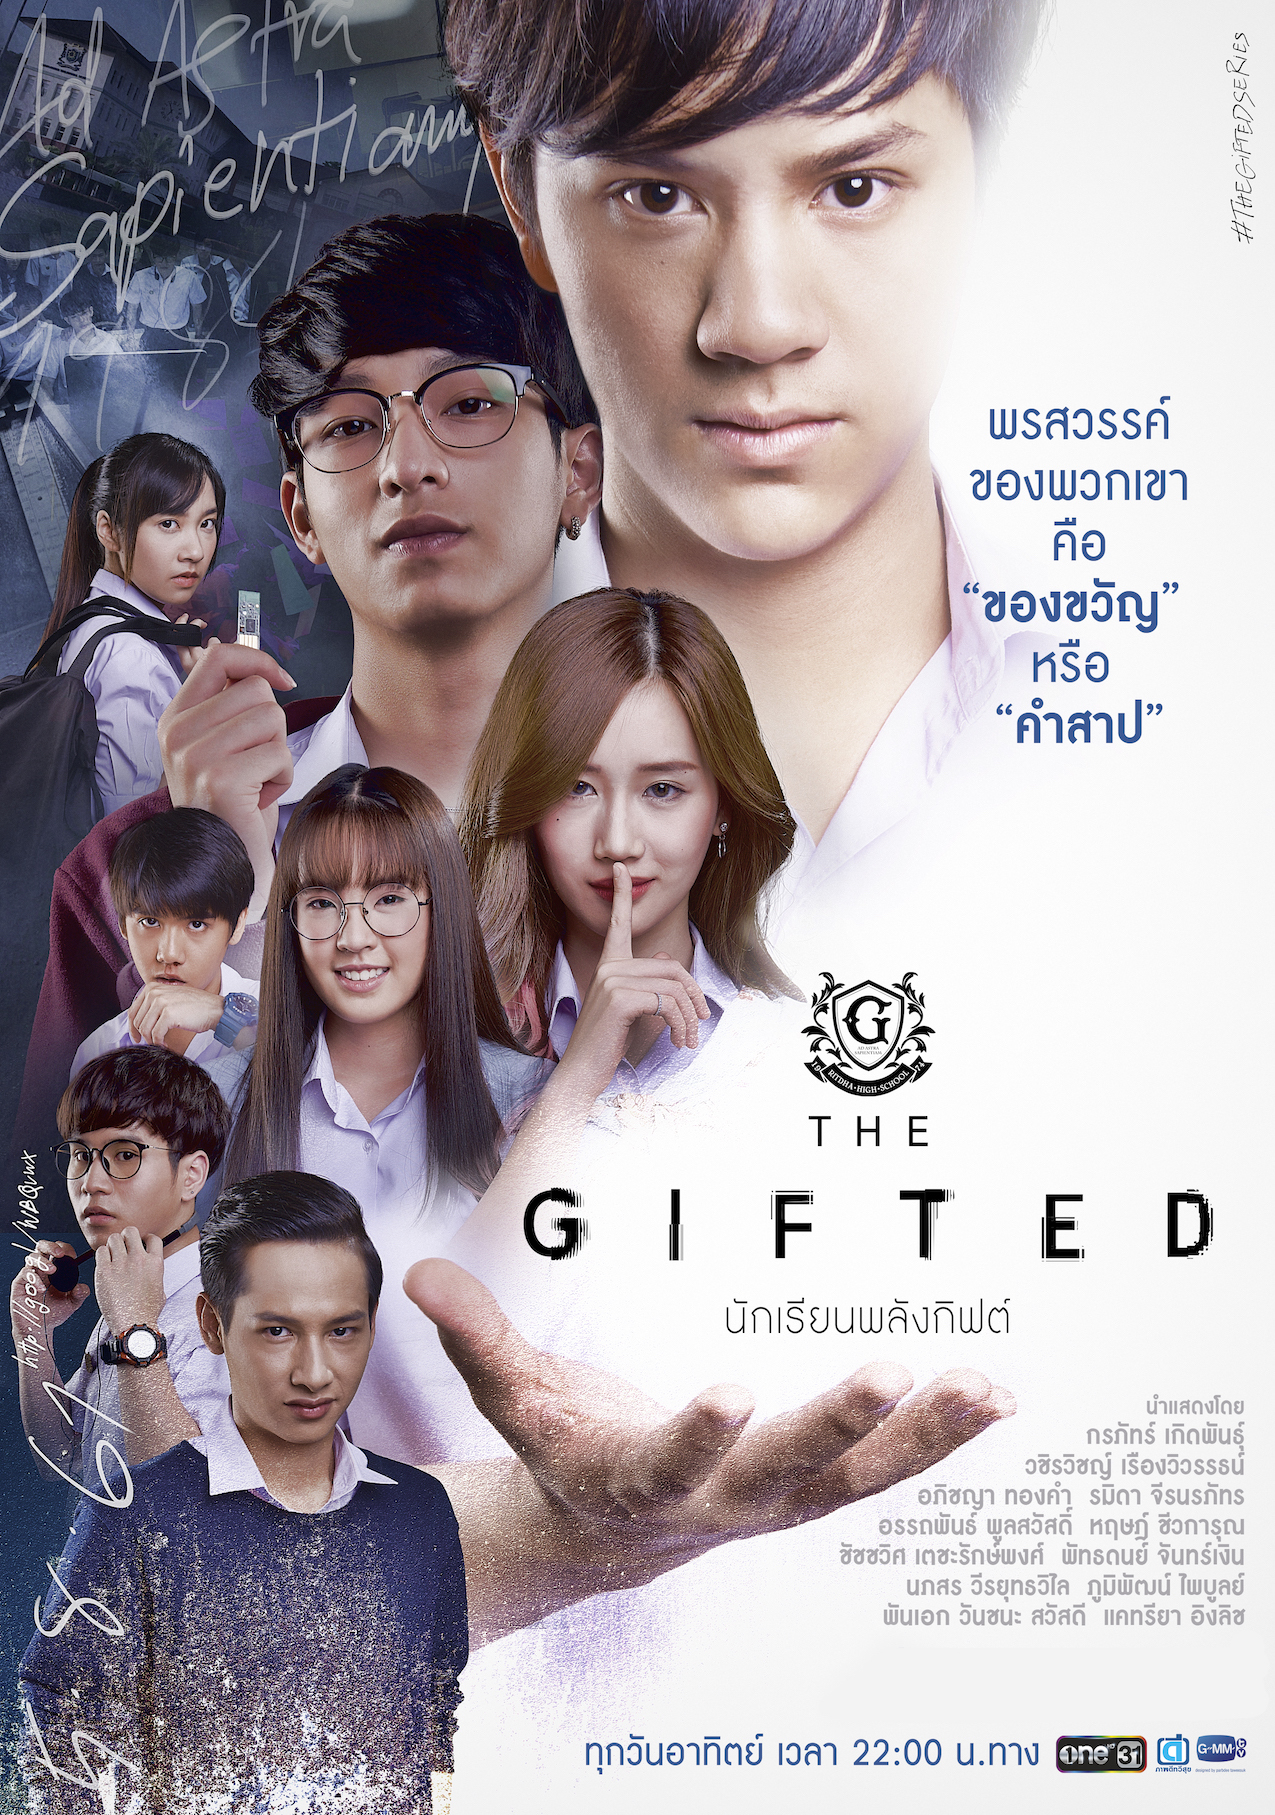 『The Gifted』